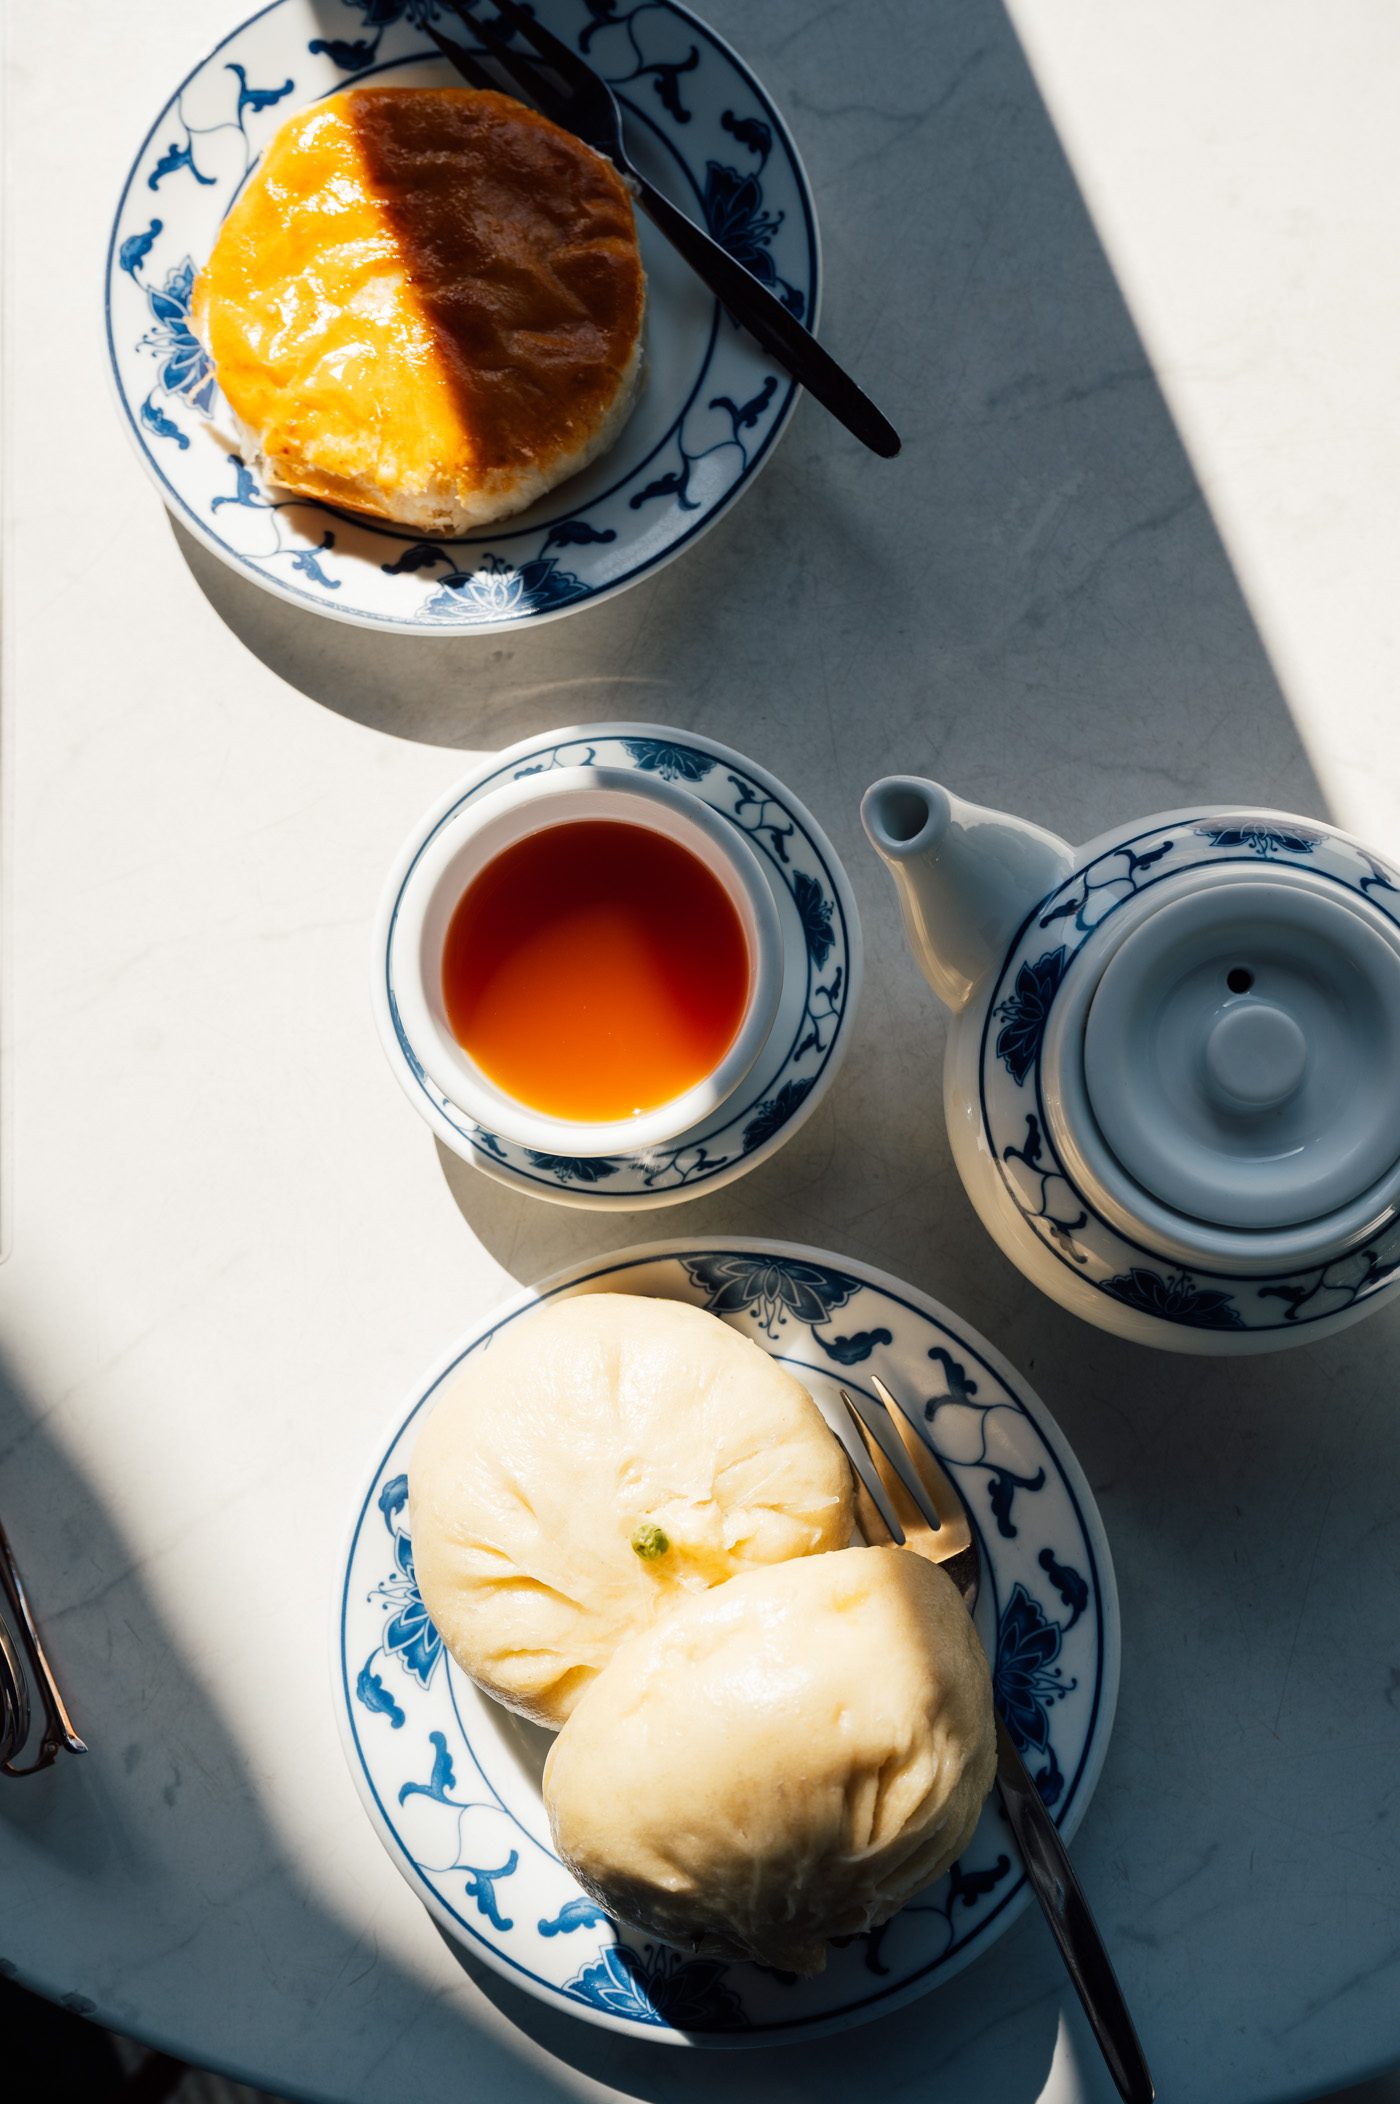 Tea and dumplings at the Chinese teahouse at Chinese garden at Gardens of the World in Berlin